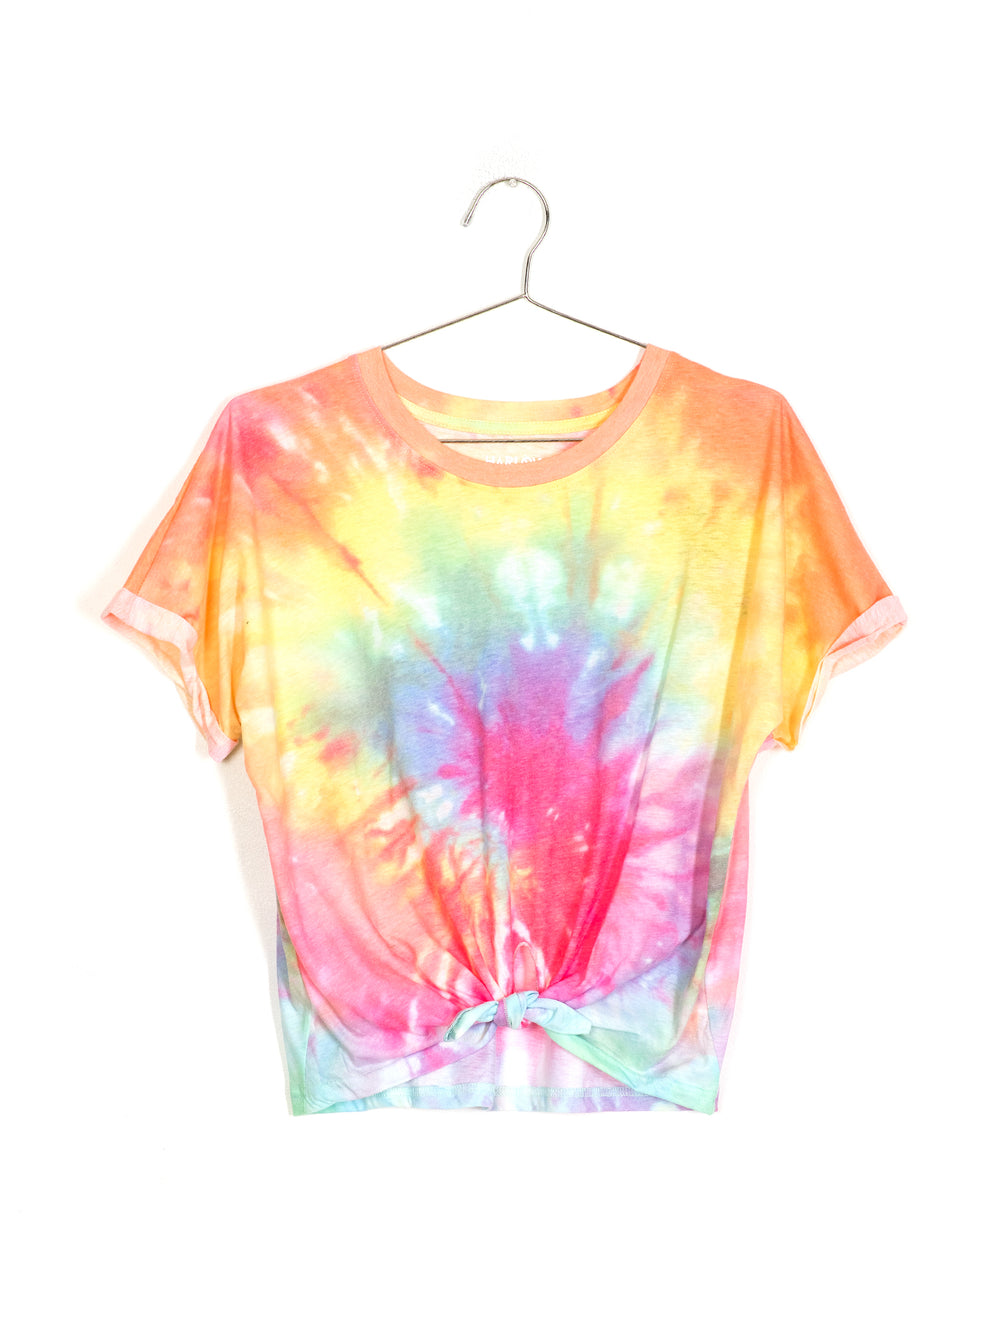 HARLOW LAYLA KNOTTED TIE DYE TEE - CLEARANCE